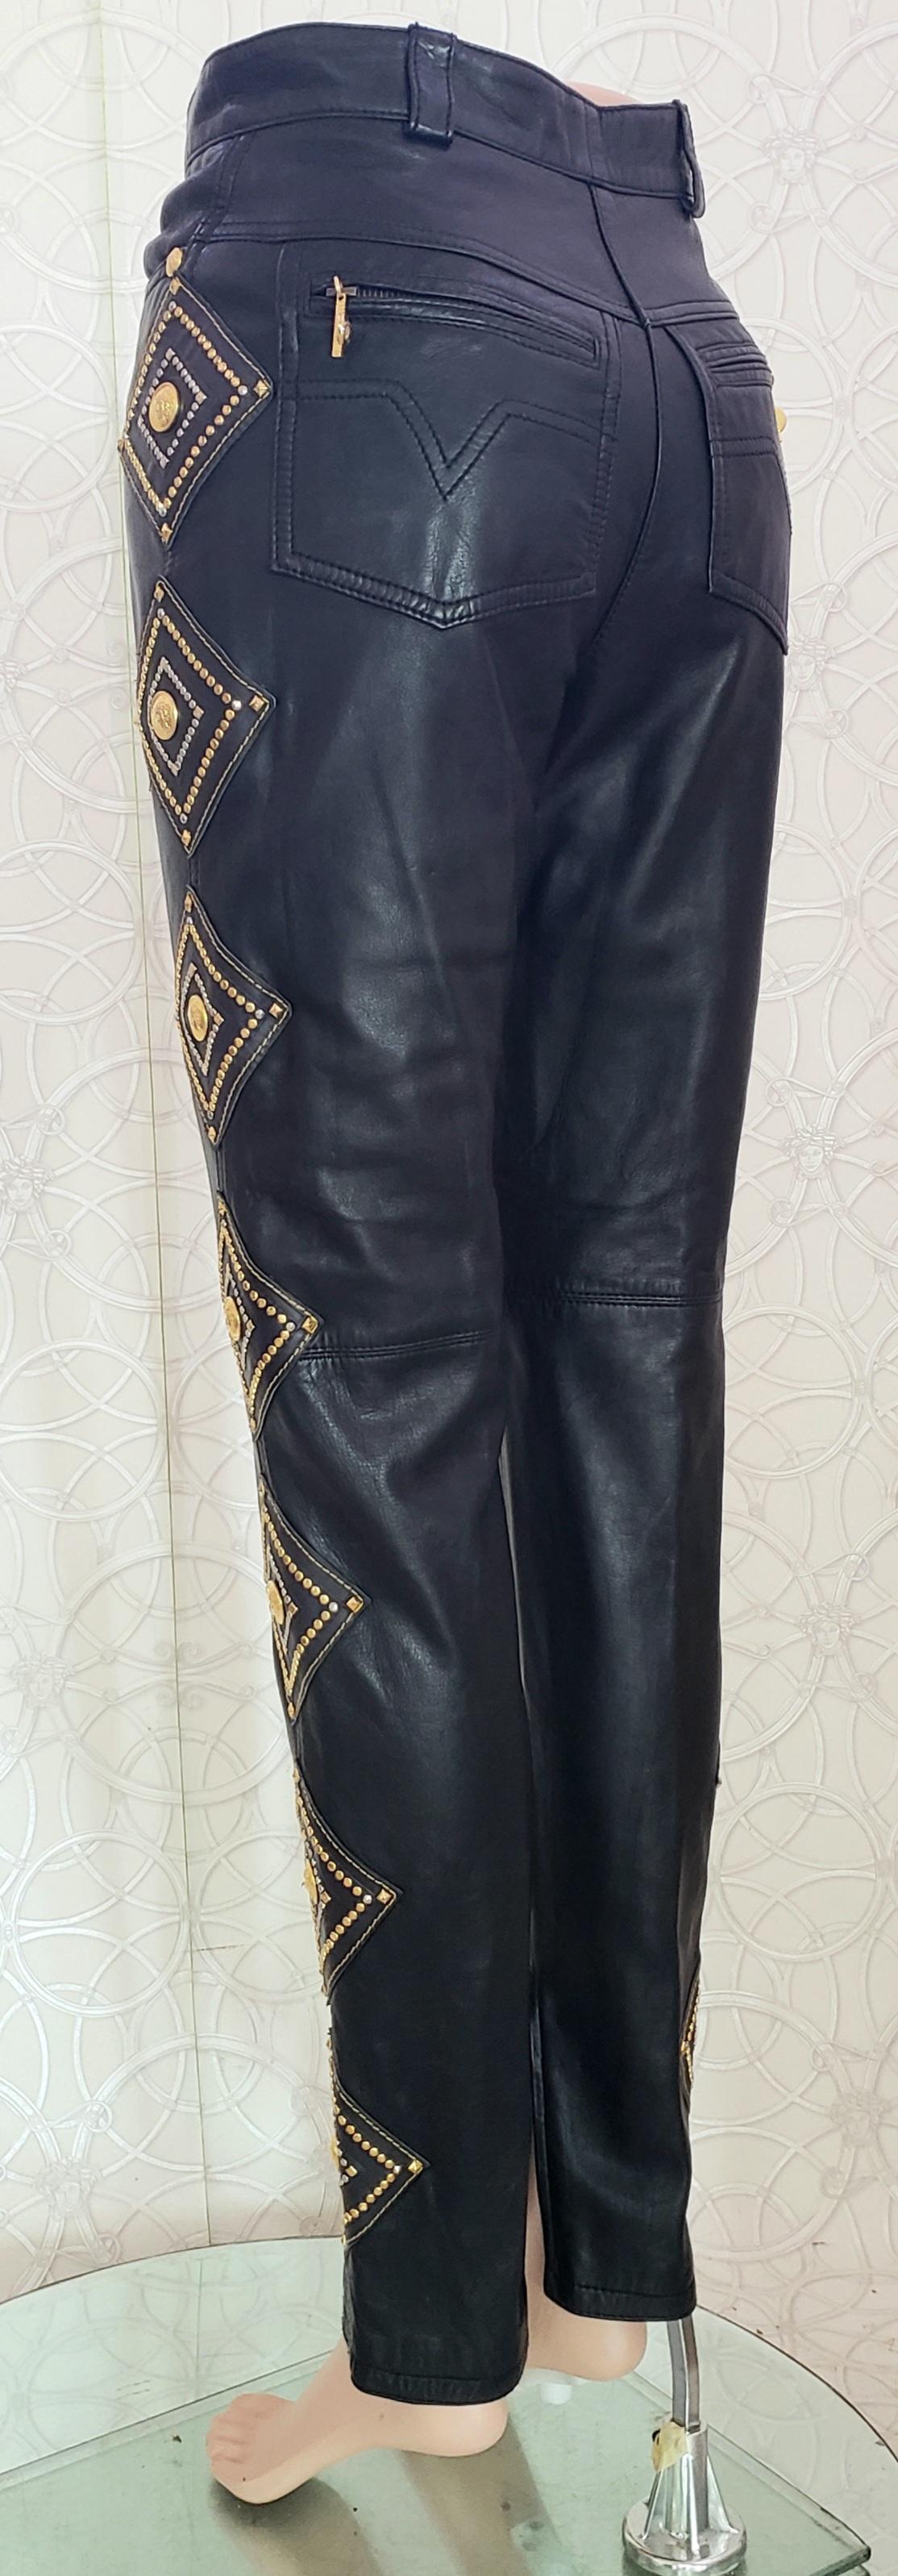 1991 GIANNI VERSACE PRIVATE MUSEUM WORTHY COLLECTION BLACK LEATHER STUDDED Pants For Sale 1